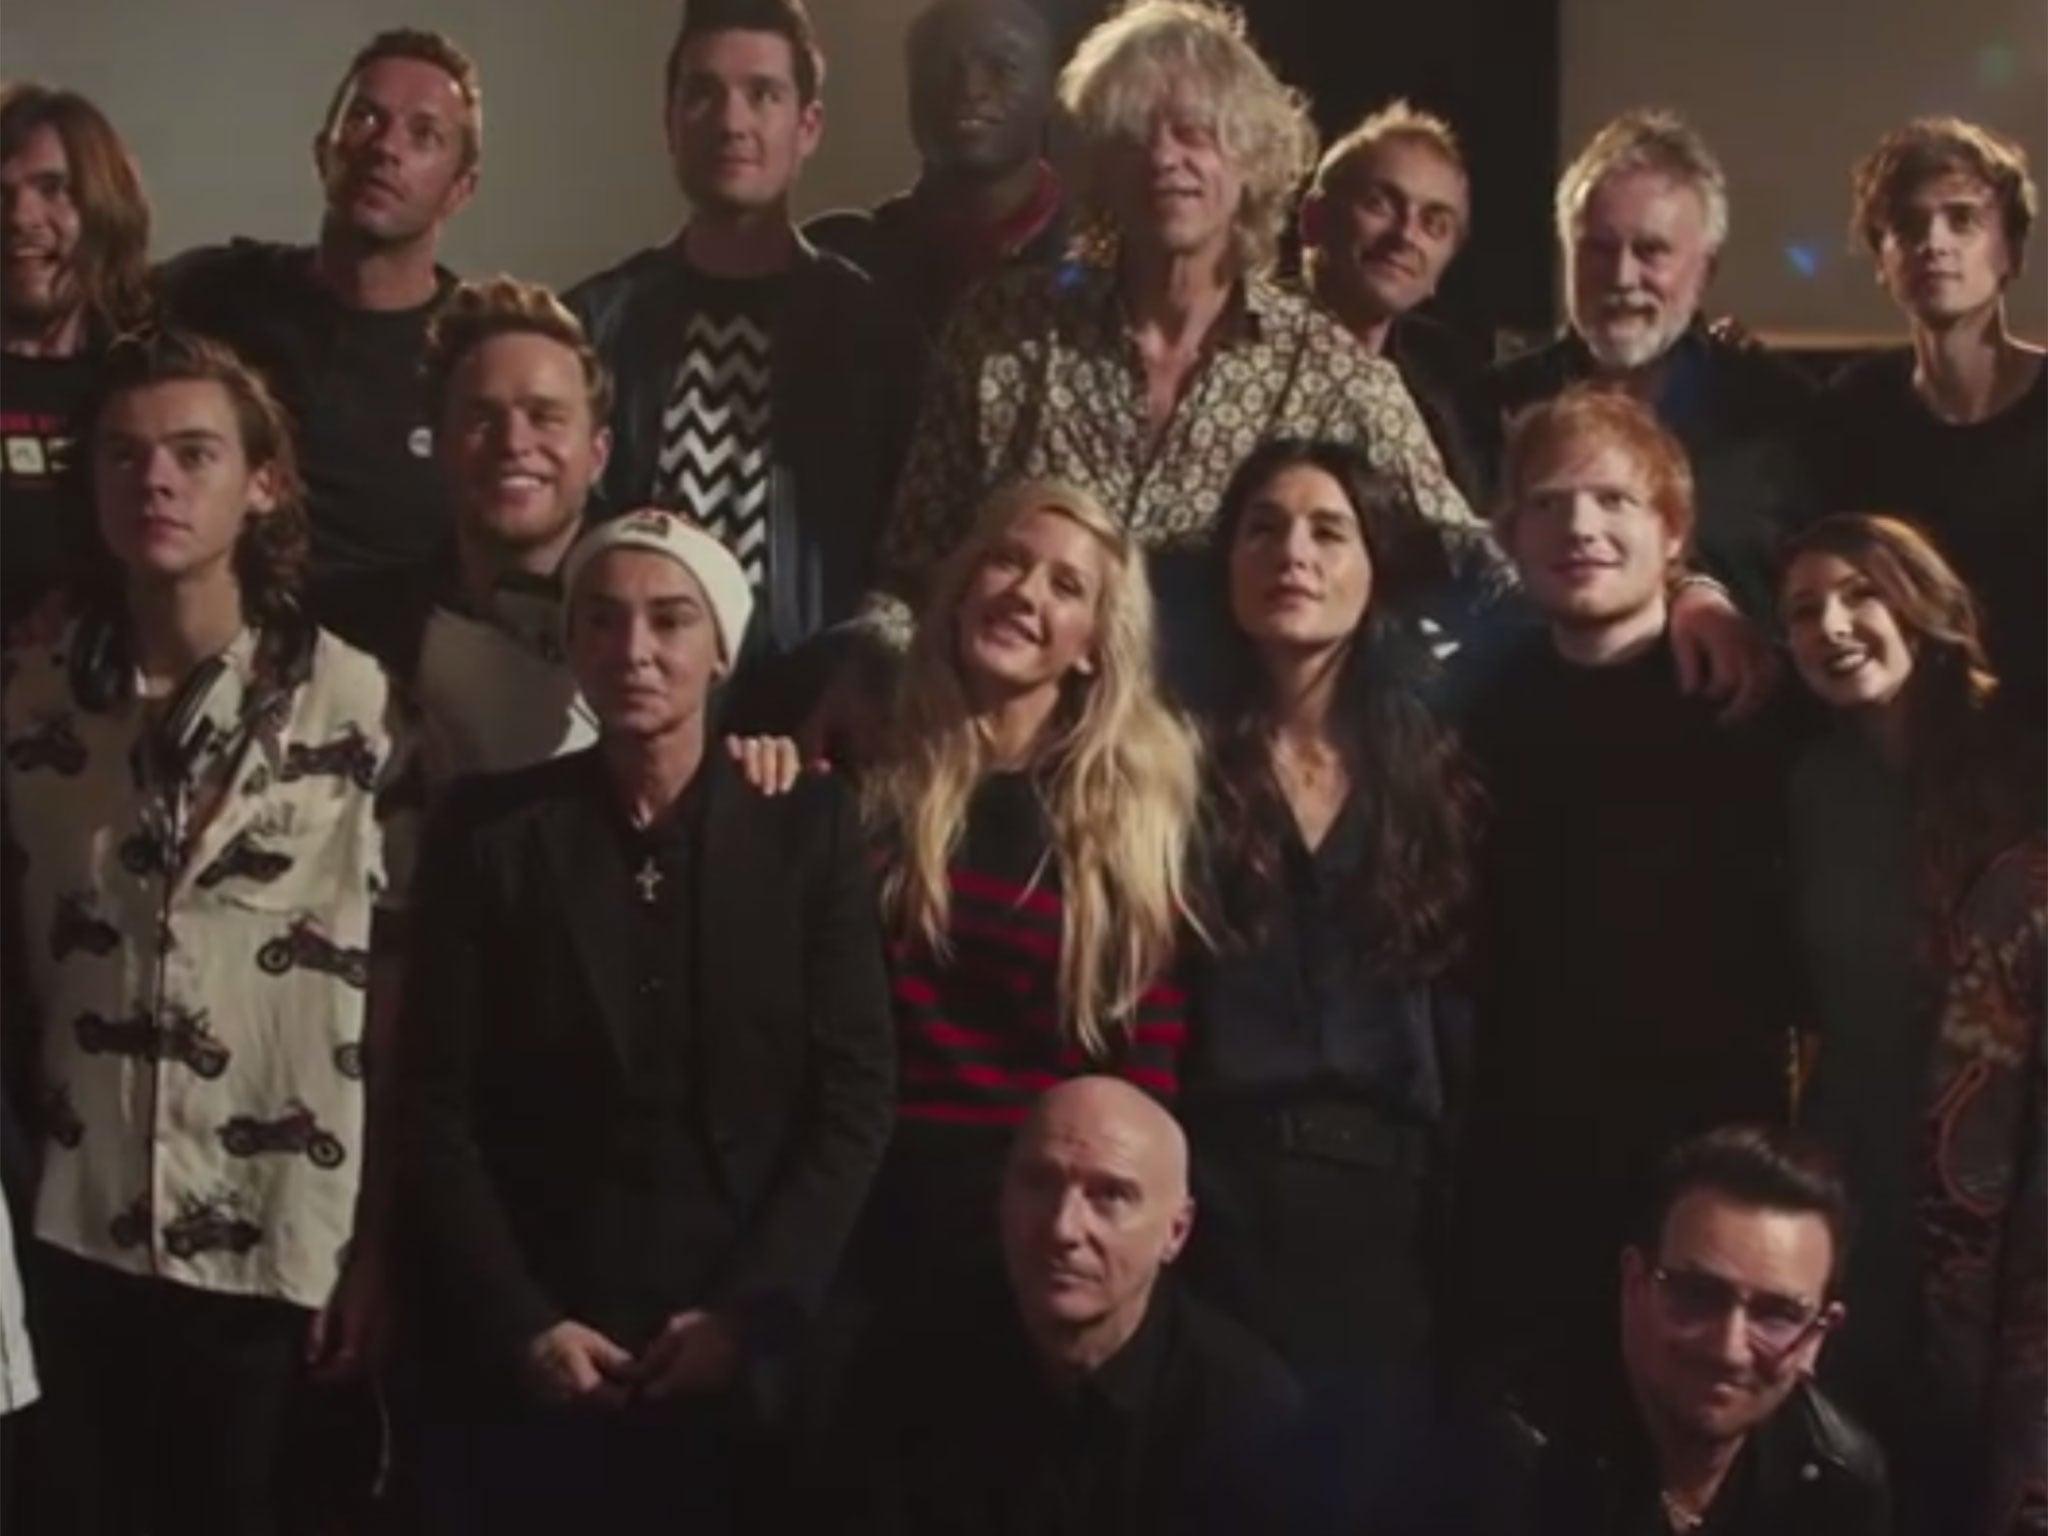 Band Aid 30: 'Do They Know It's Christmas' single storms to